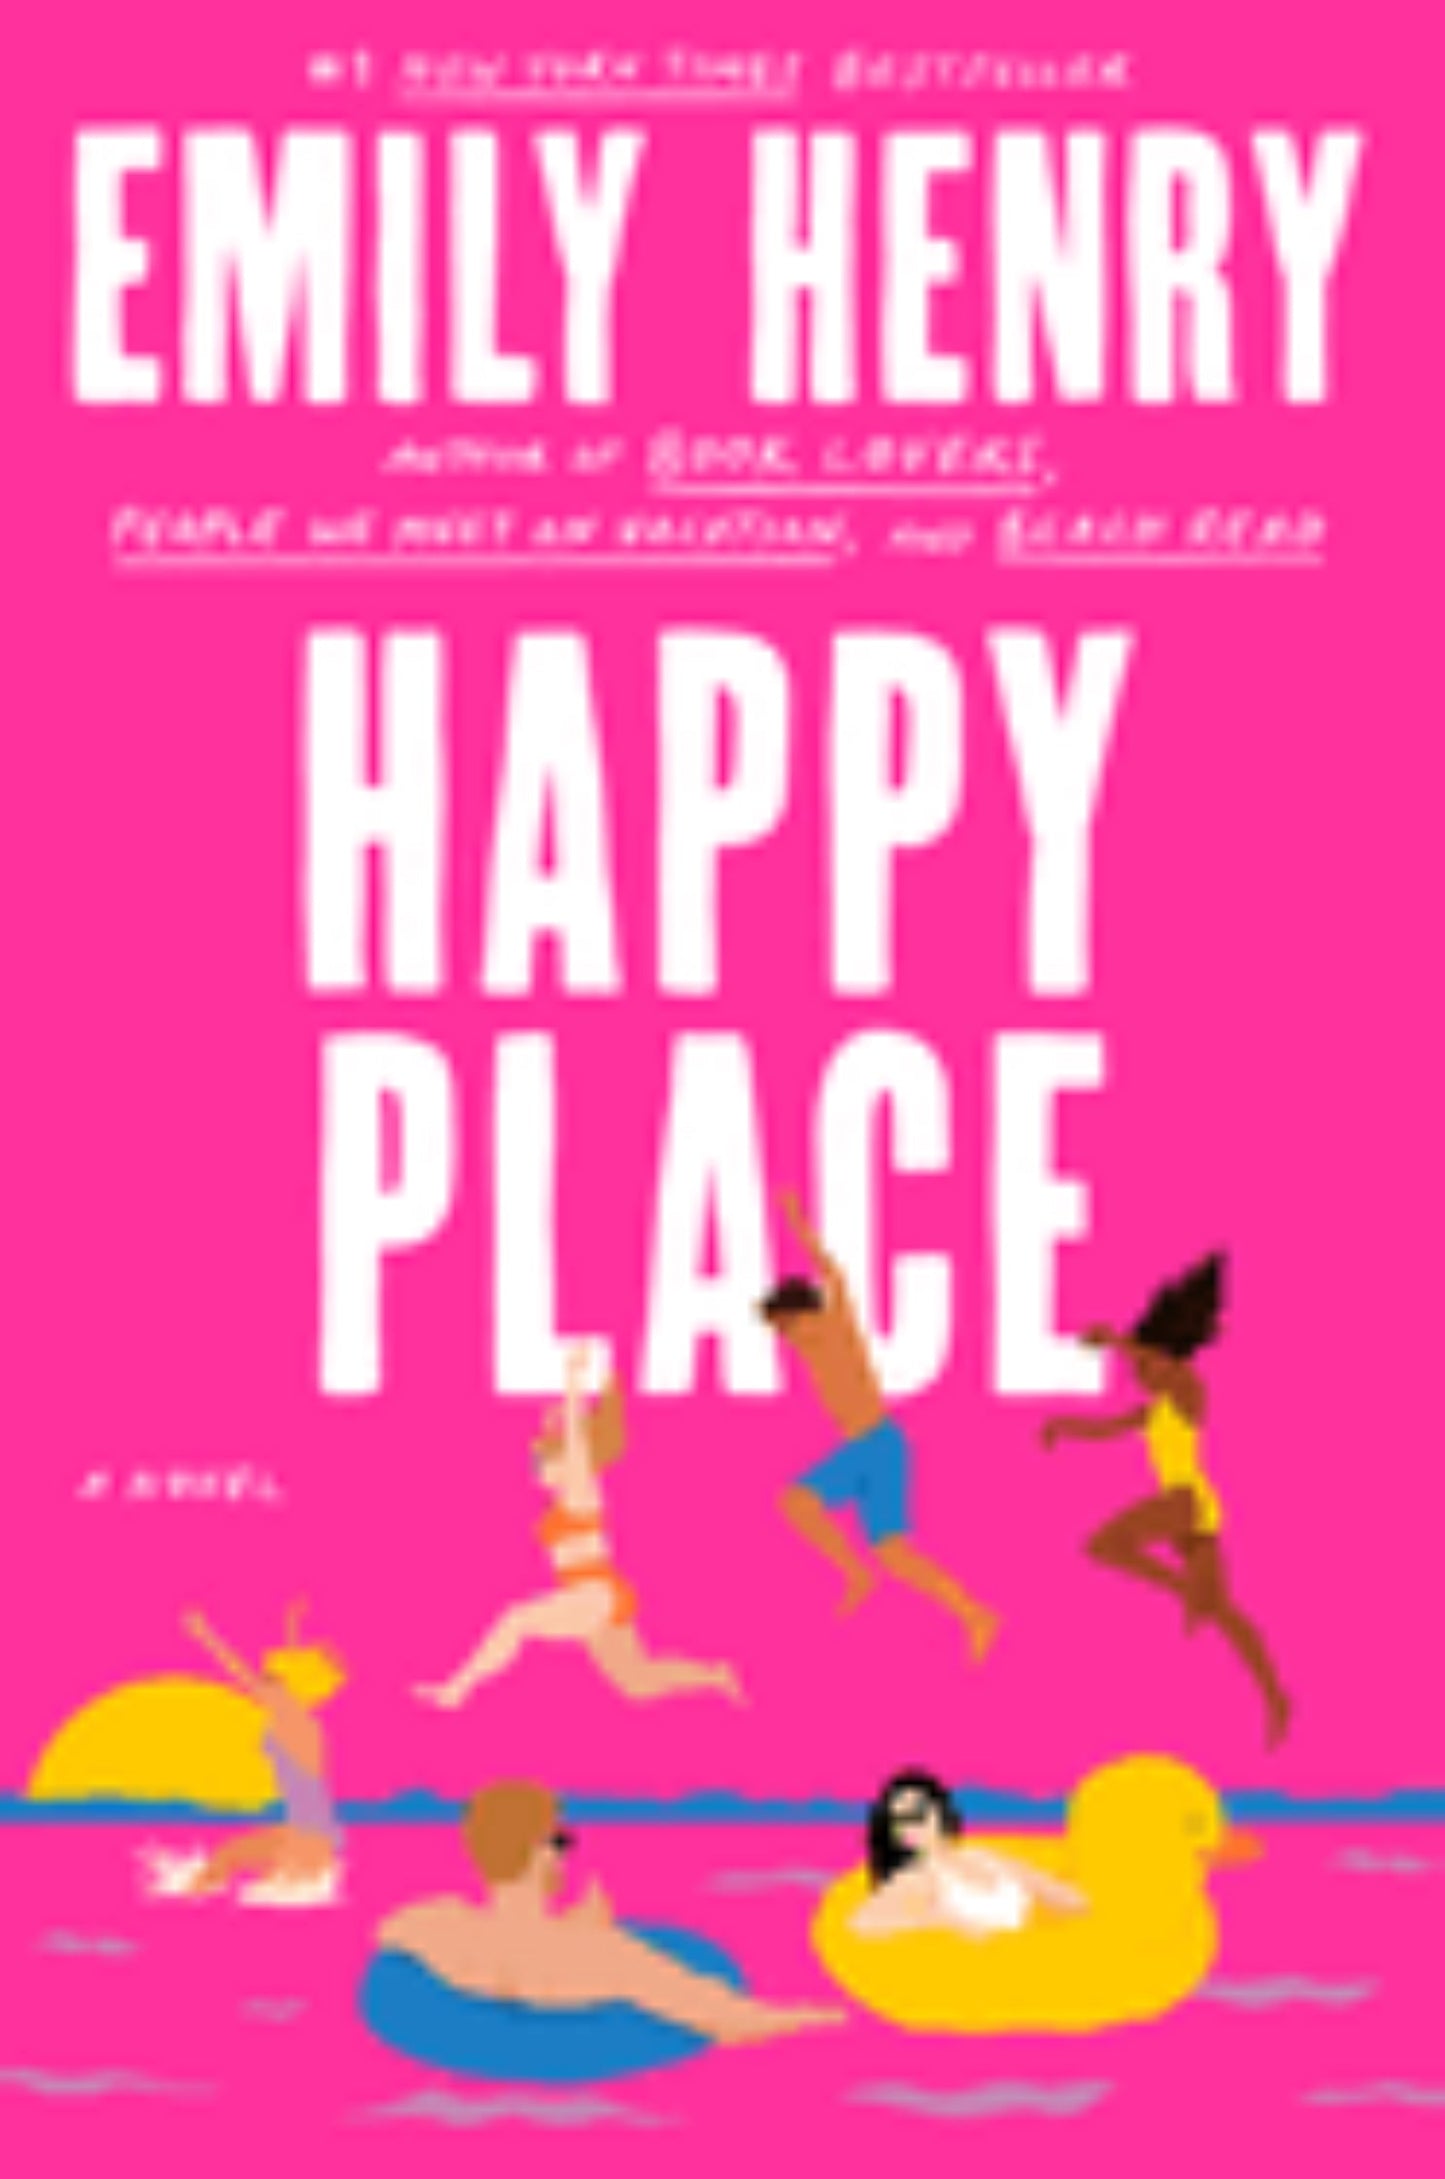 Happy Place
by Emily Henry